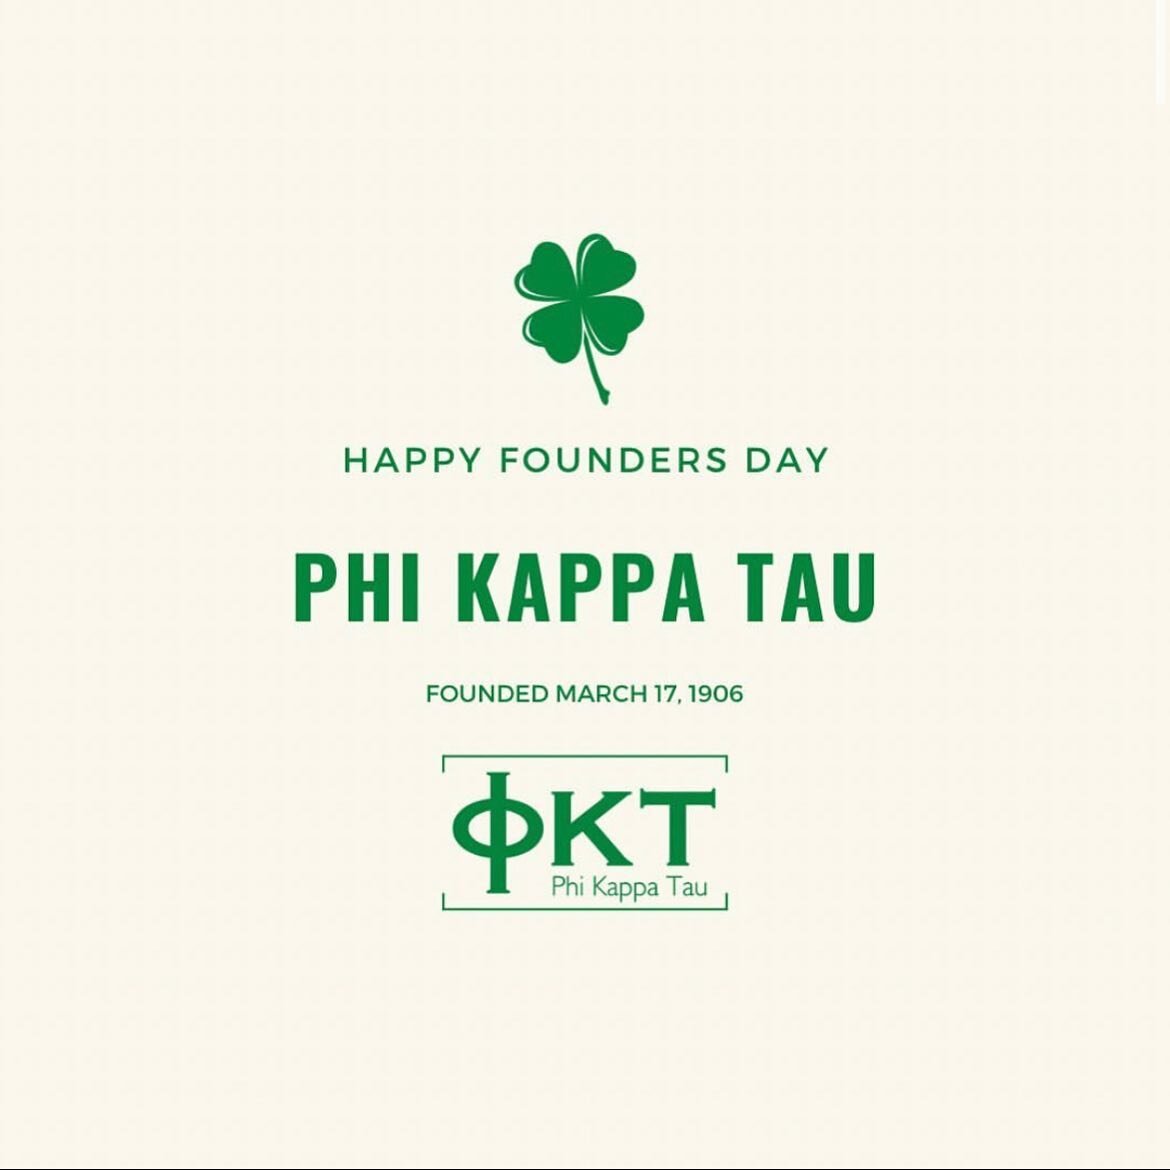 Happy Founders Day to us and all Phi Tau&rsquo;s around the country!
117 years ago, our 4 founders at Miami University of Ohio came together to form the organization that&rsquo;s made men of distinction across the country. To donate to our Founder&rs